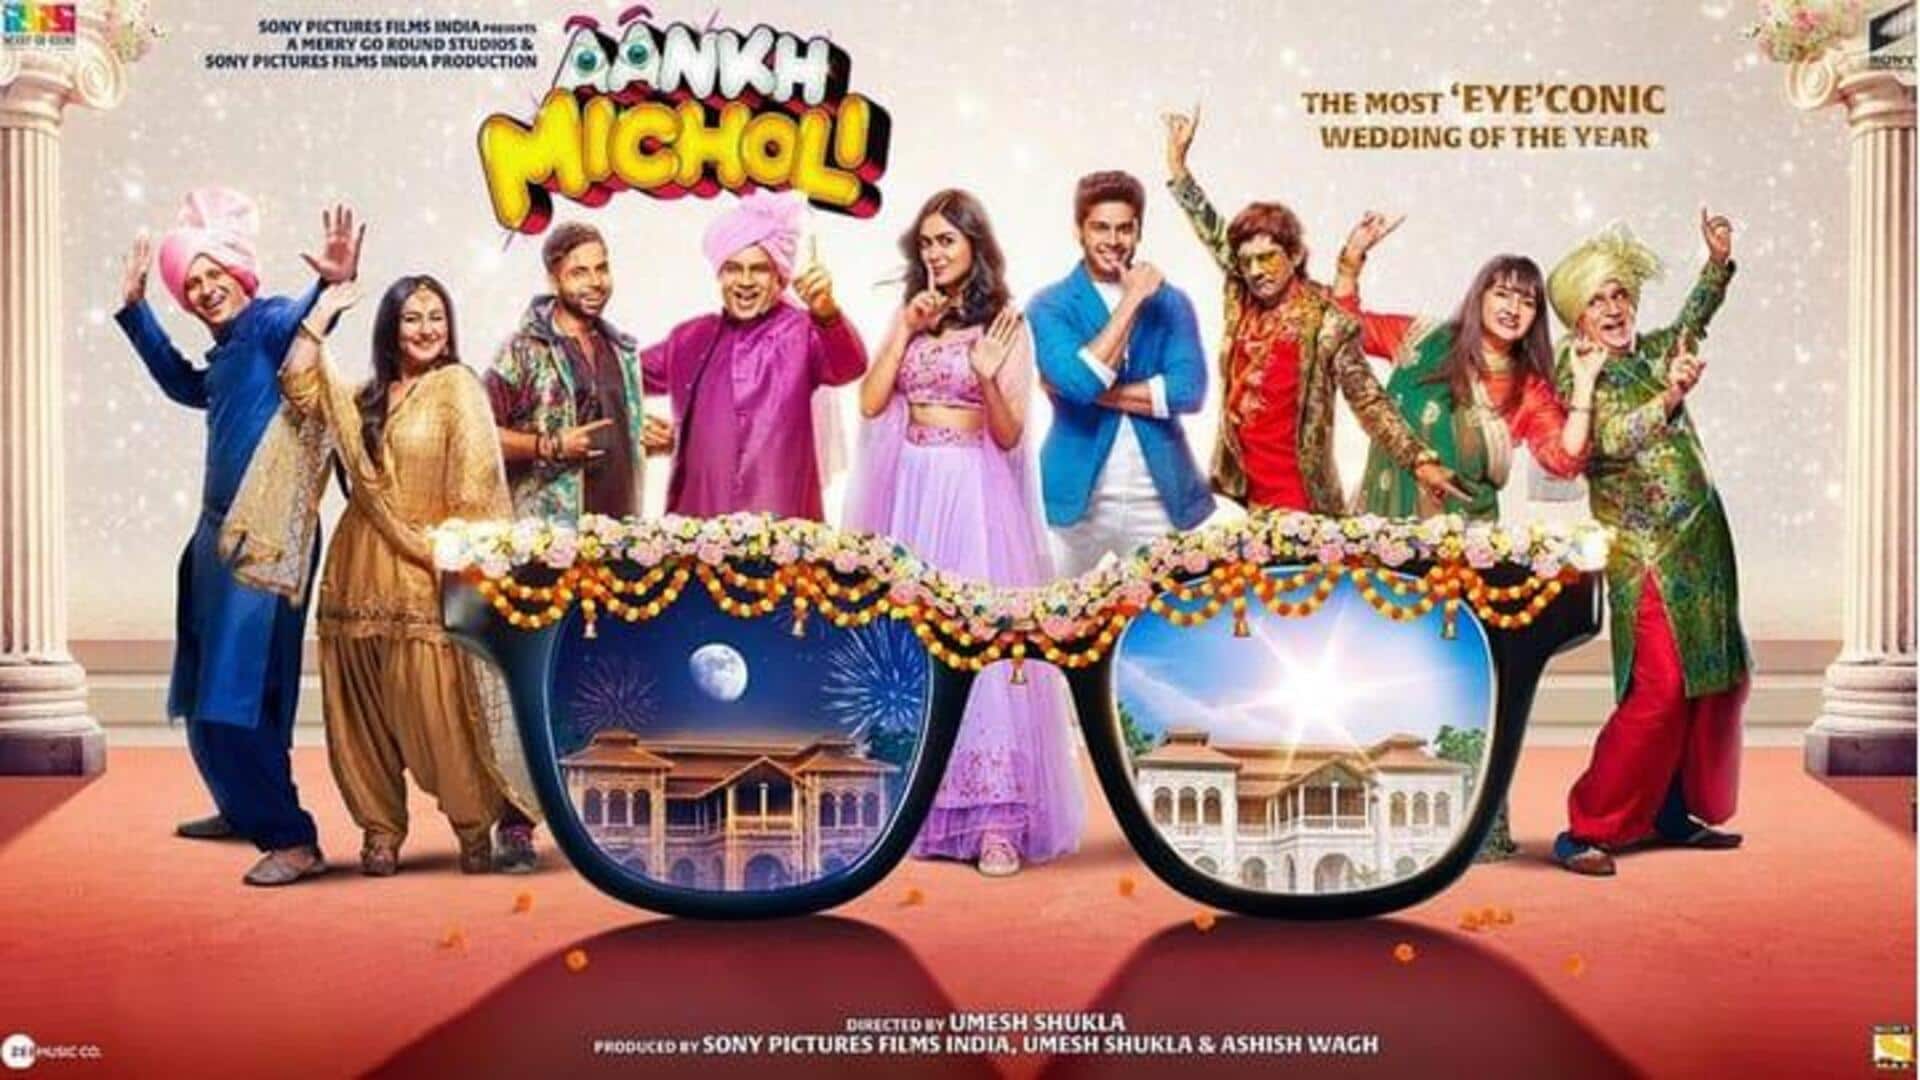 Box office: Mrunal Thakur's 'Aankh Micholi' collects  only Rs. 20L